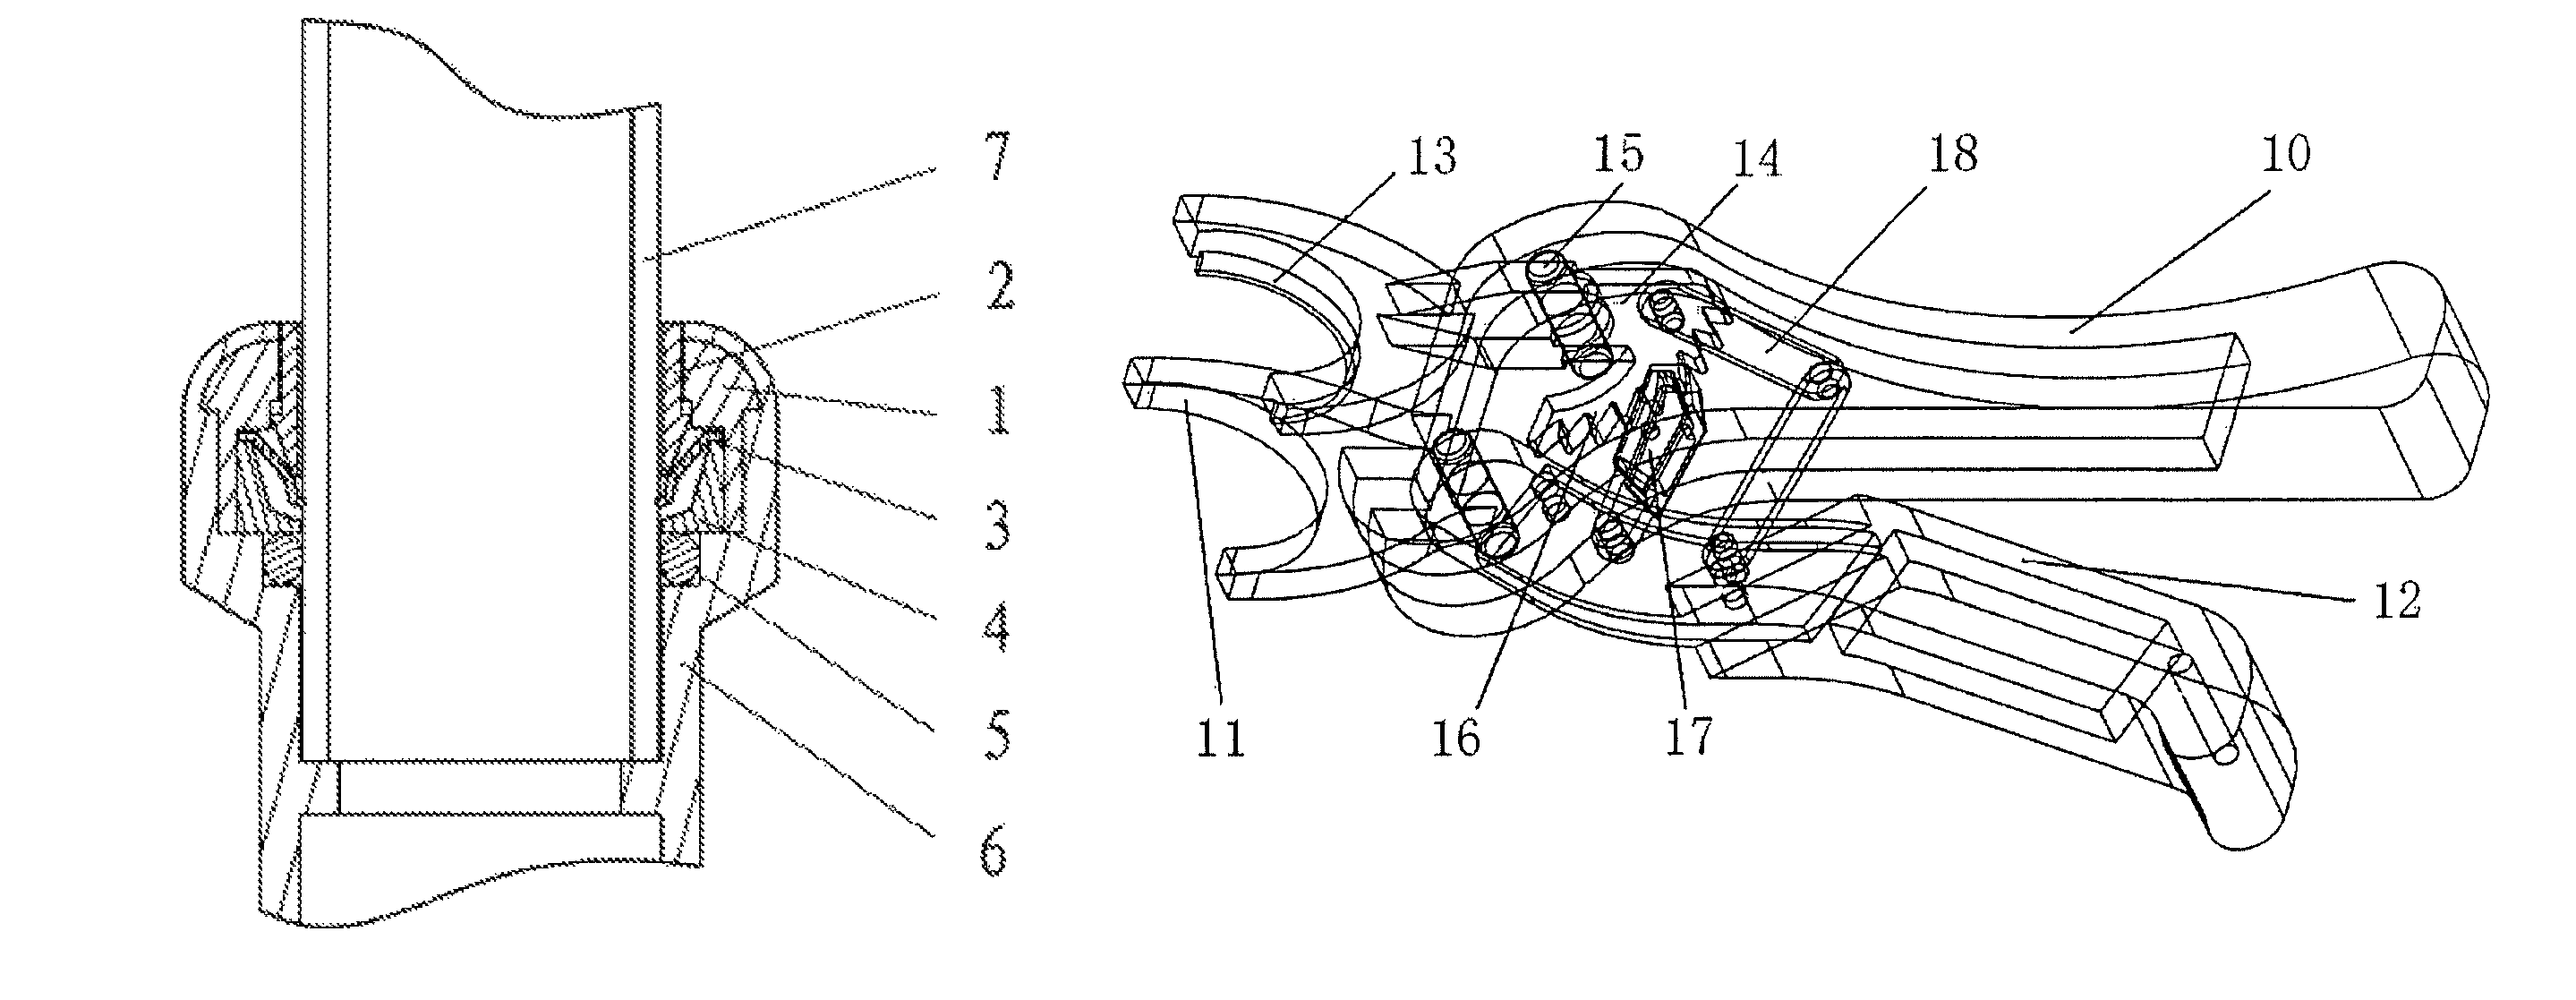 Fluid pipe connection device